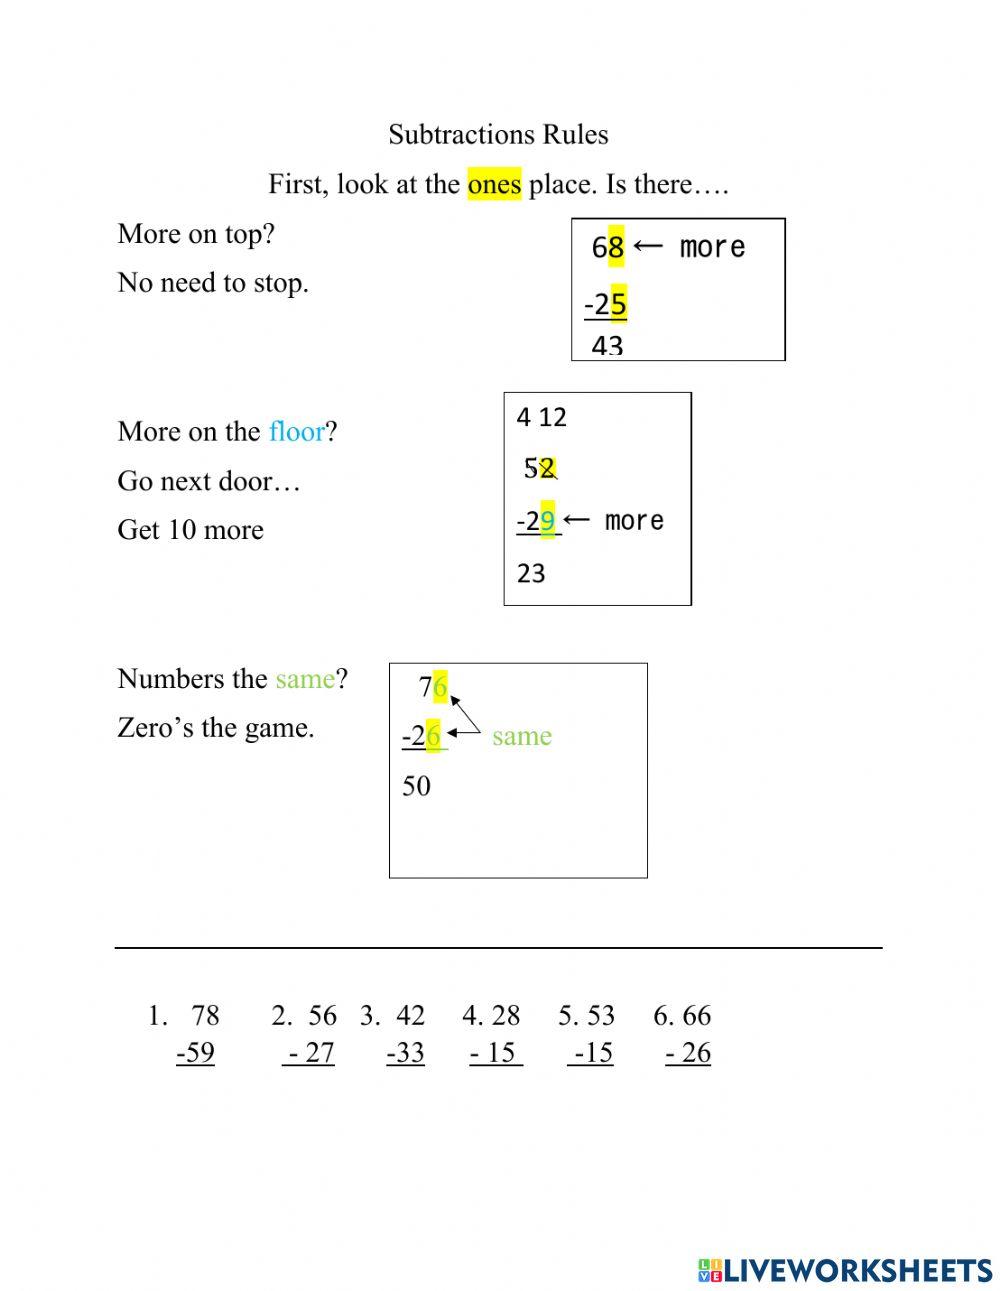 Subtraction Rules